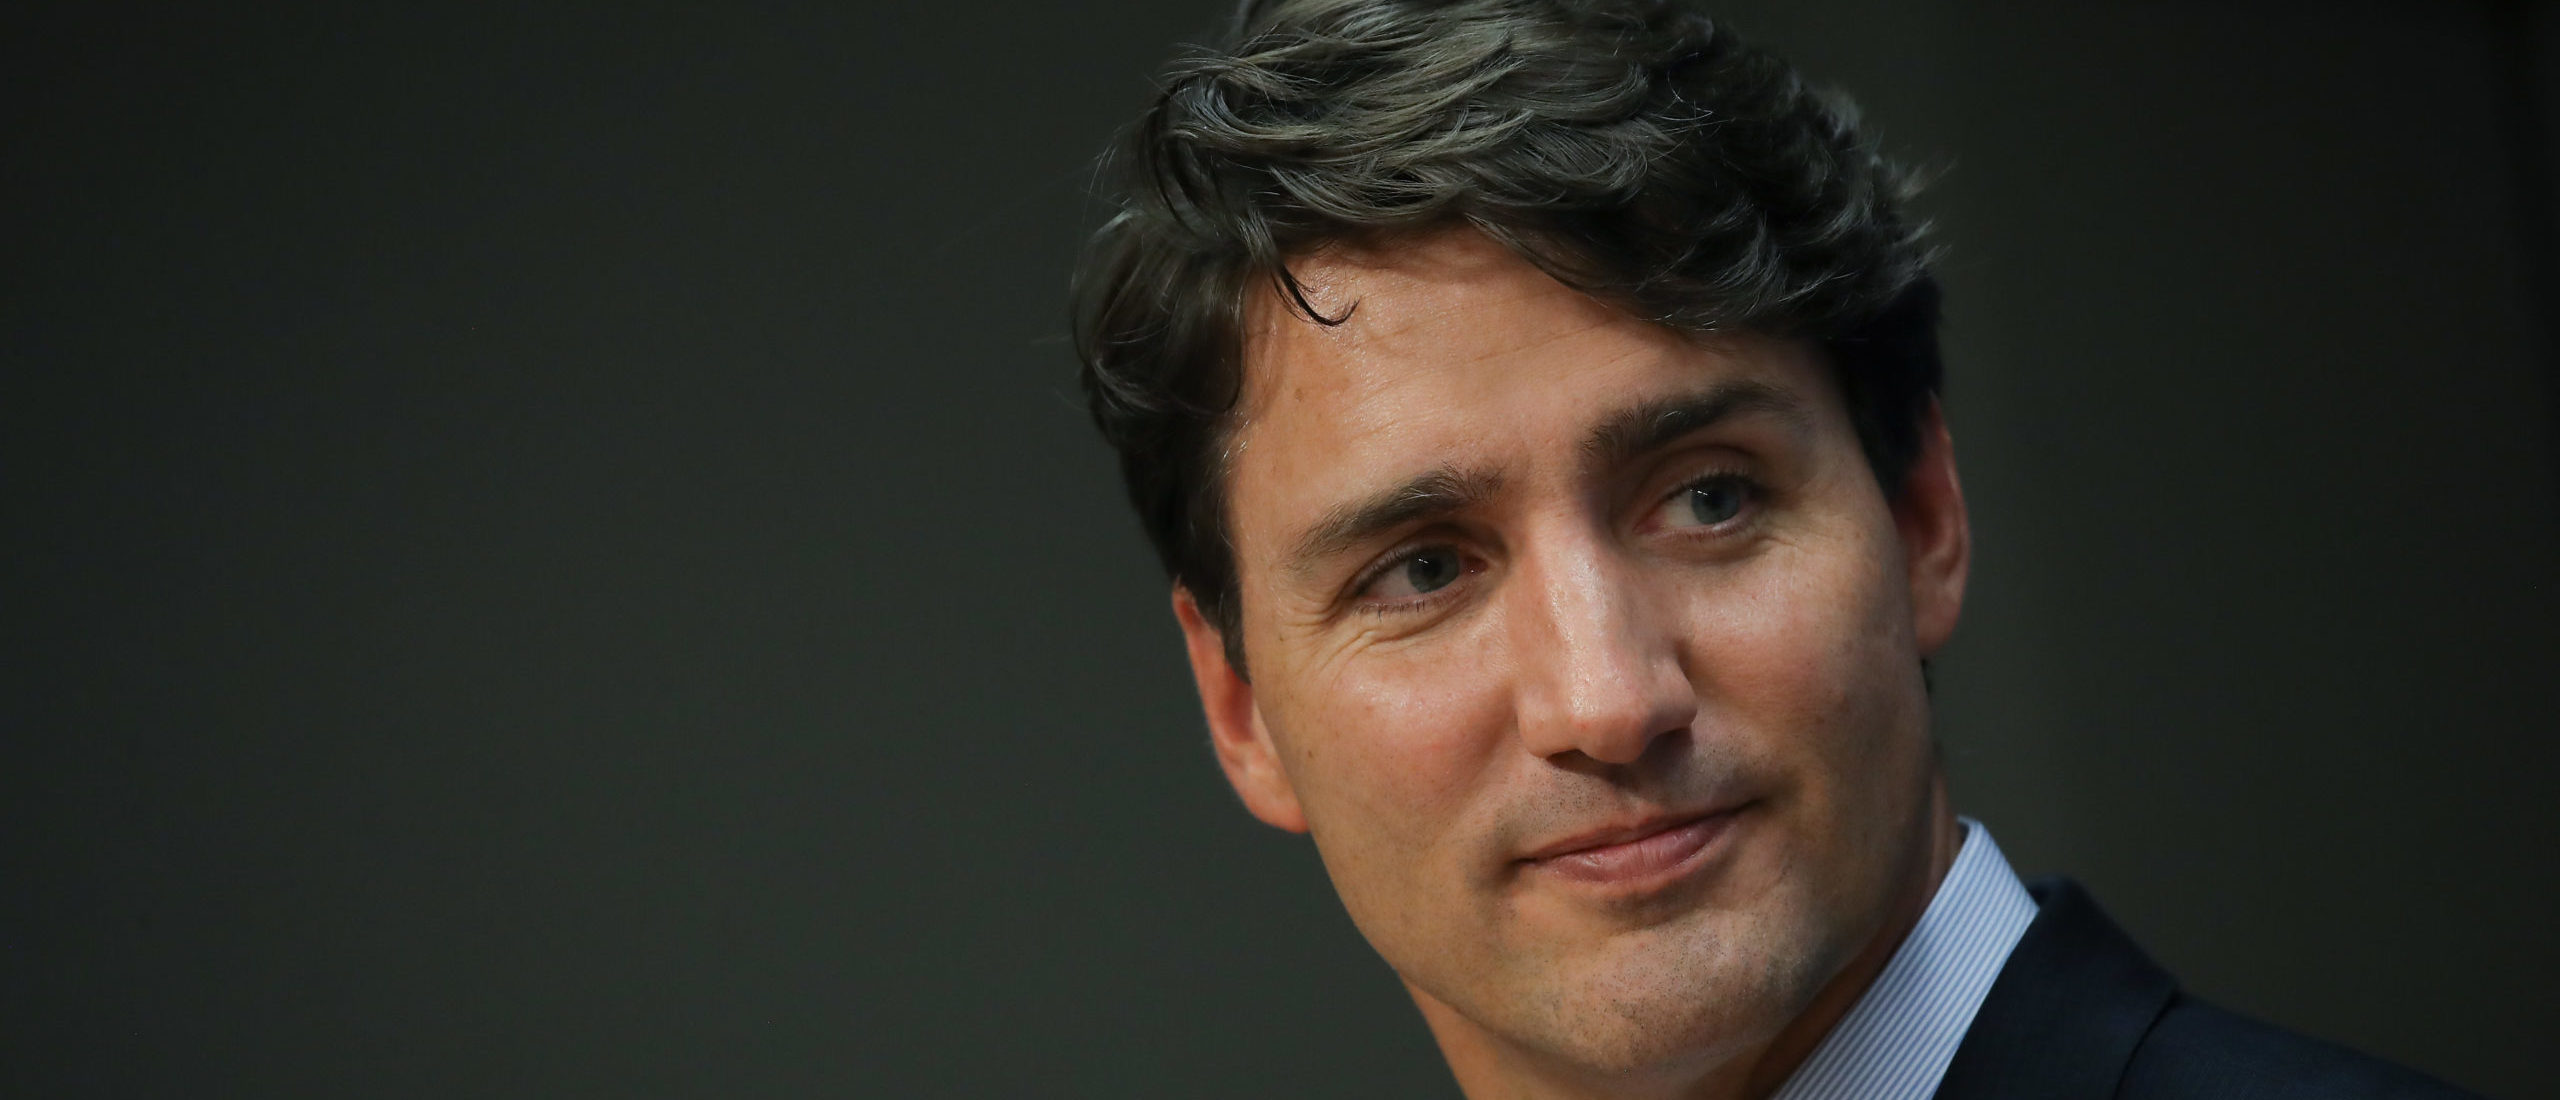 actor-allegedly-plotted-to-kill-canadian-pm-trudeau-after-murdering-his-own-mother